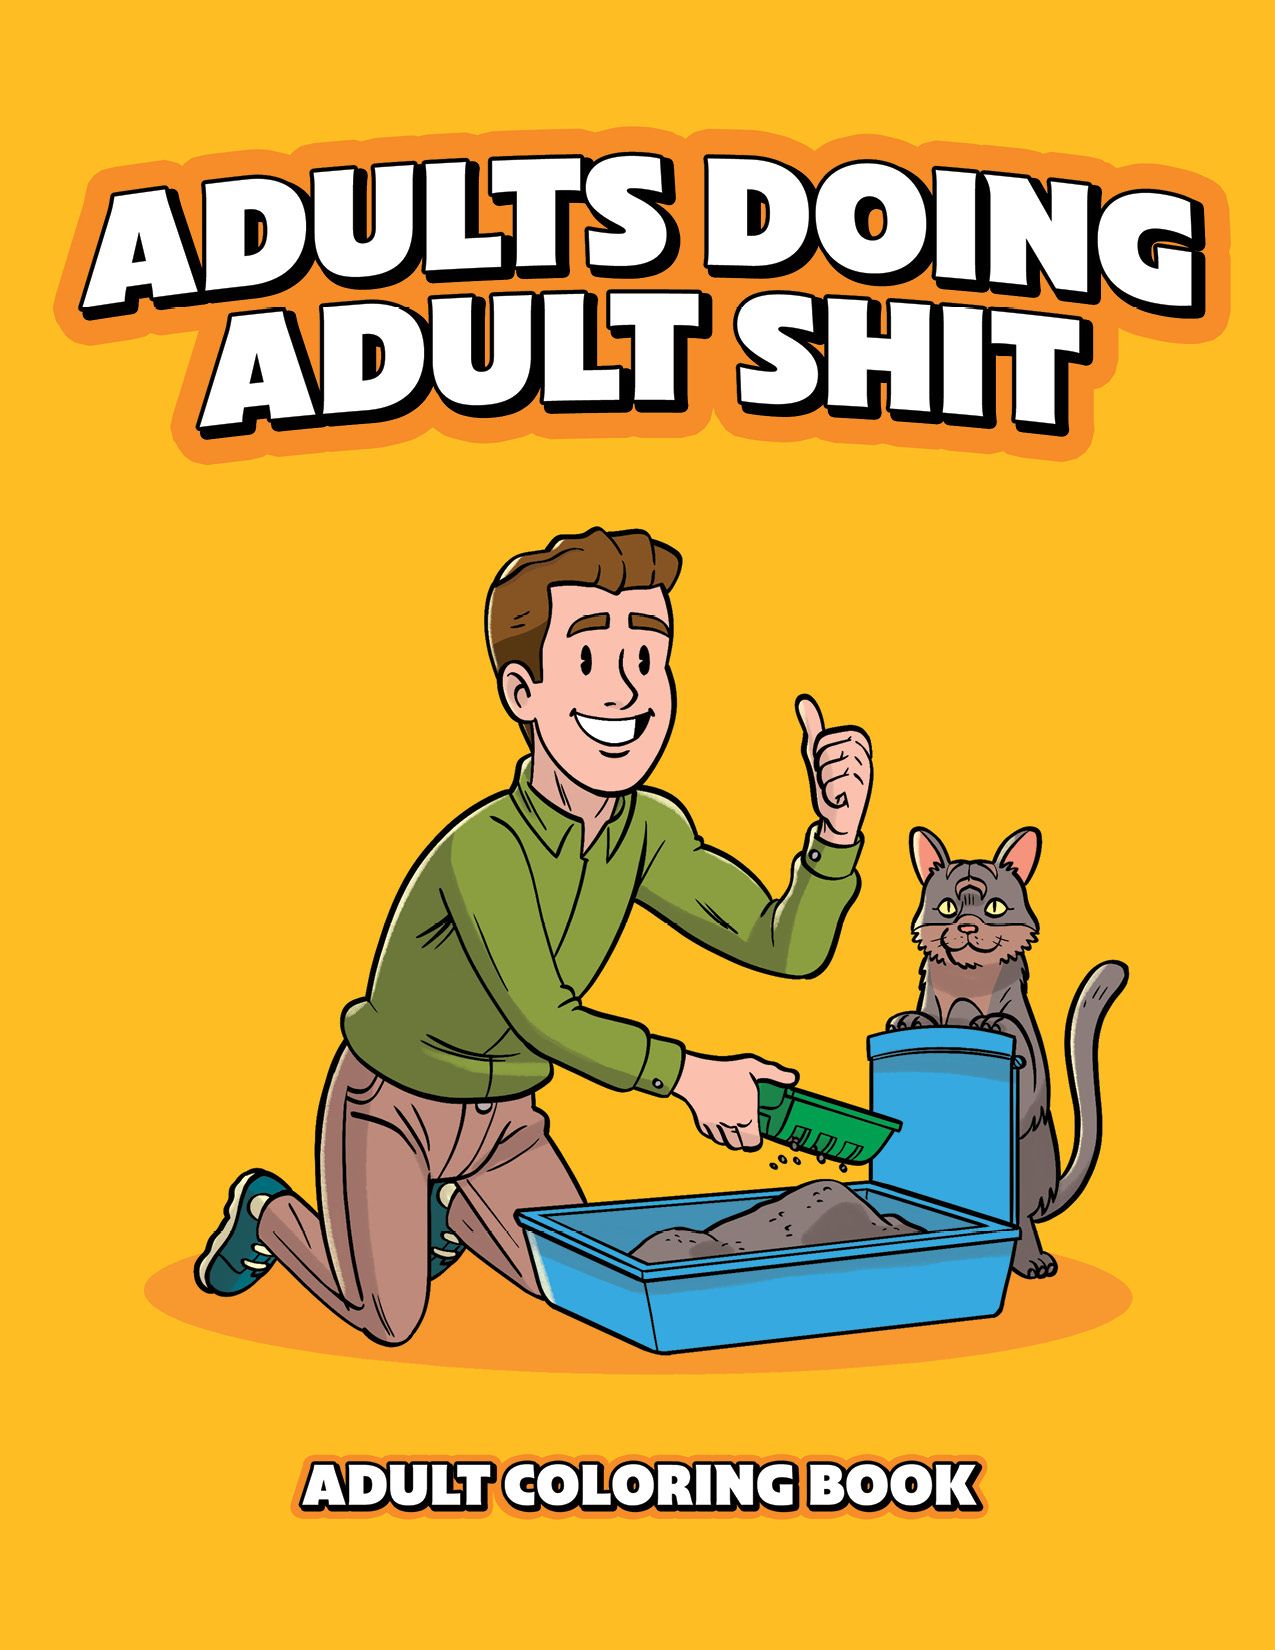 ADULTS DOING ADULT SHIT COLORING BOOK (NET)